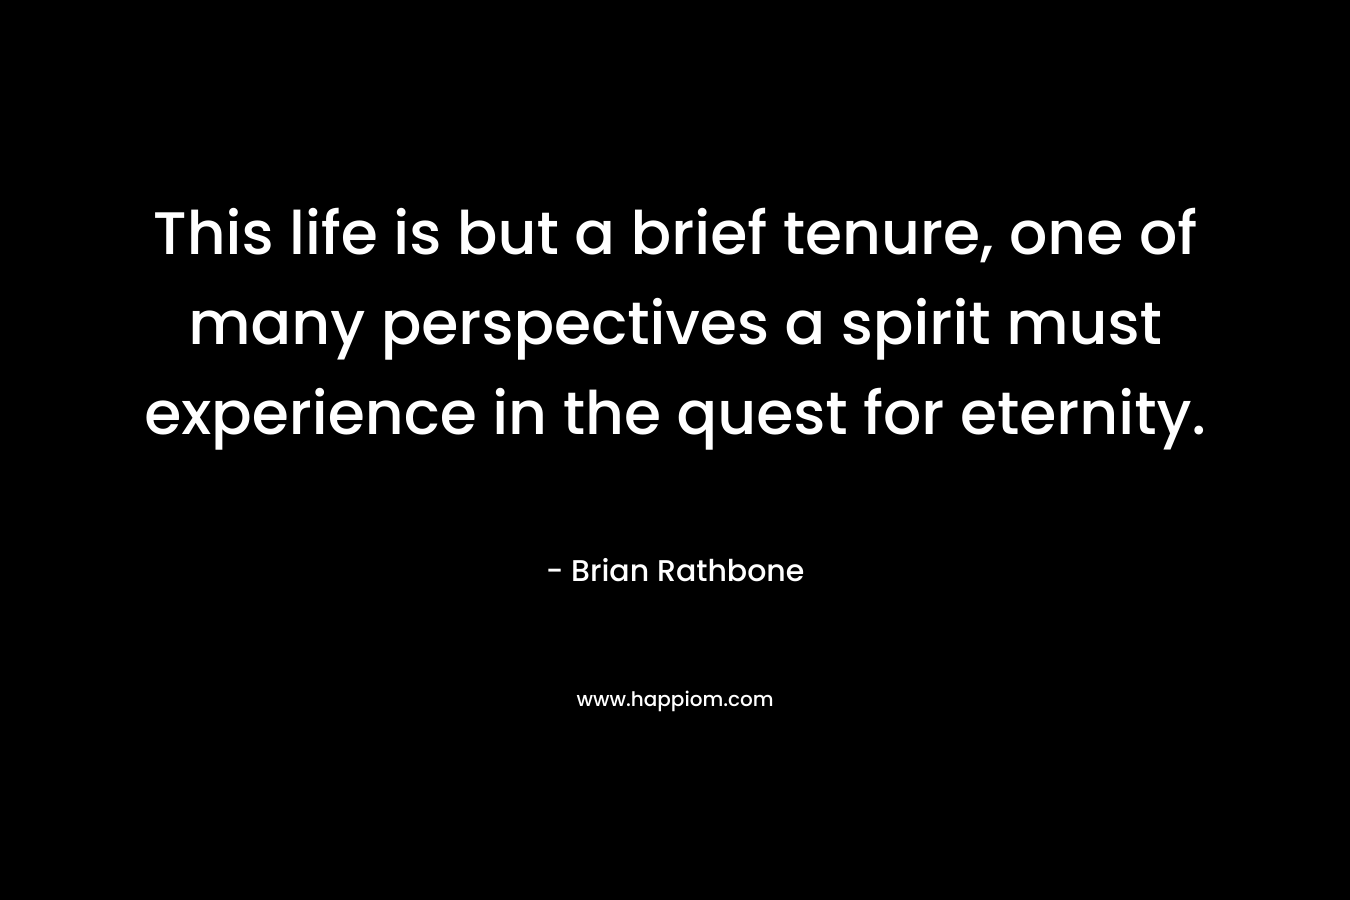 This life is but a brief tenure, one of many perspectives a spirit must experience in the quest for eternity.